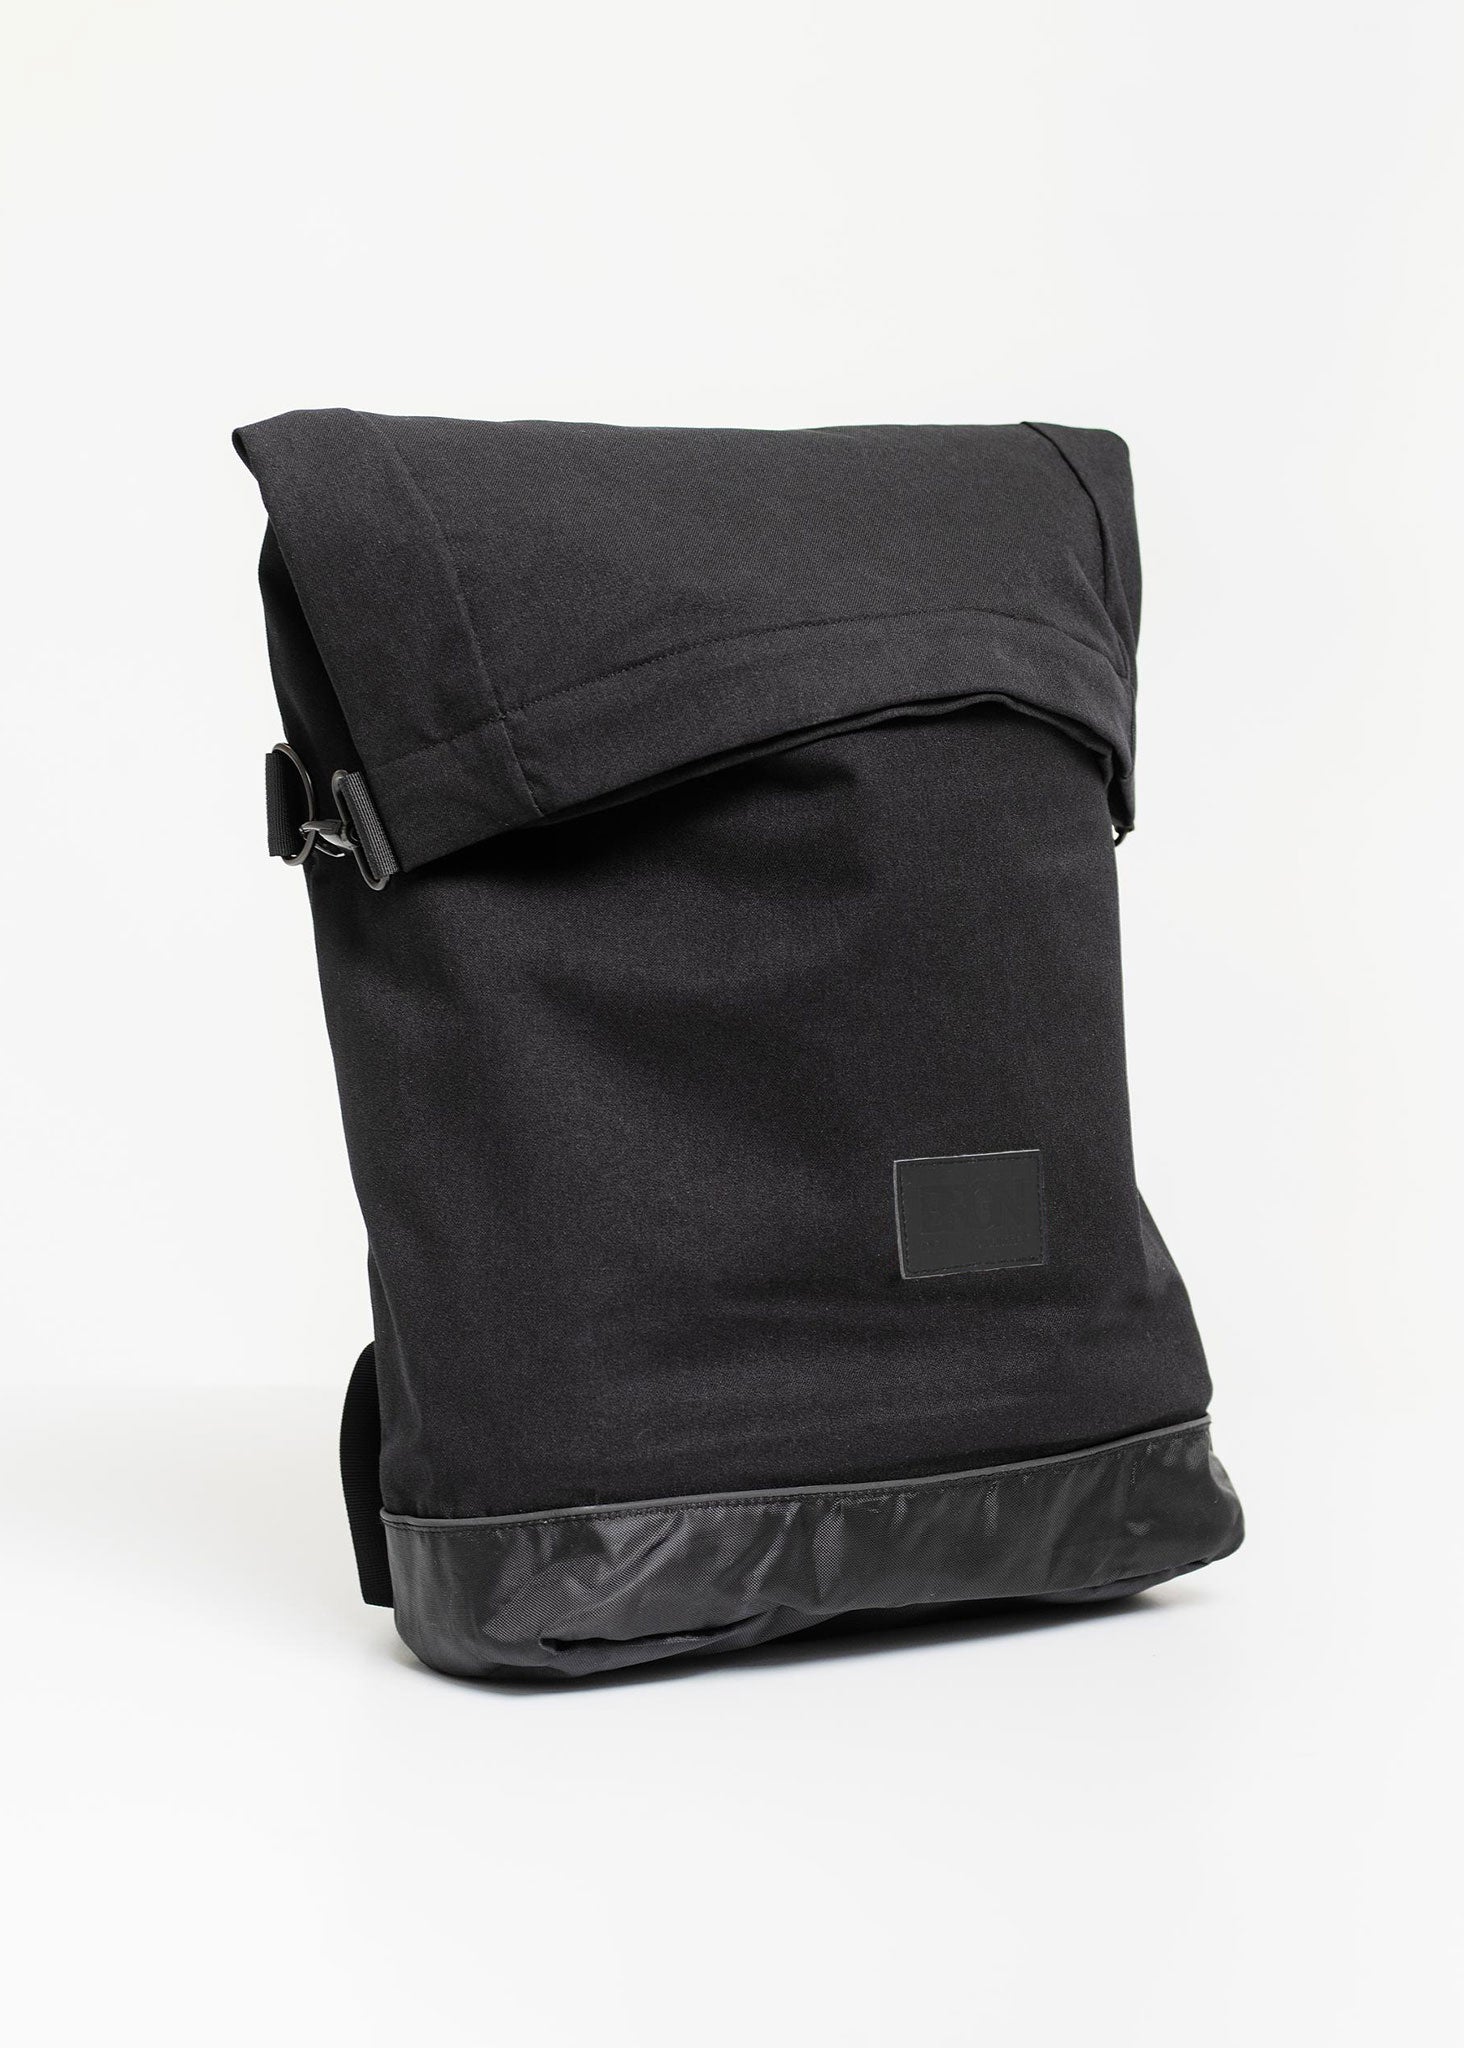 BRGN Backpack Accessories 096 All Black